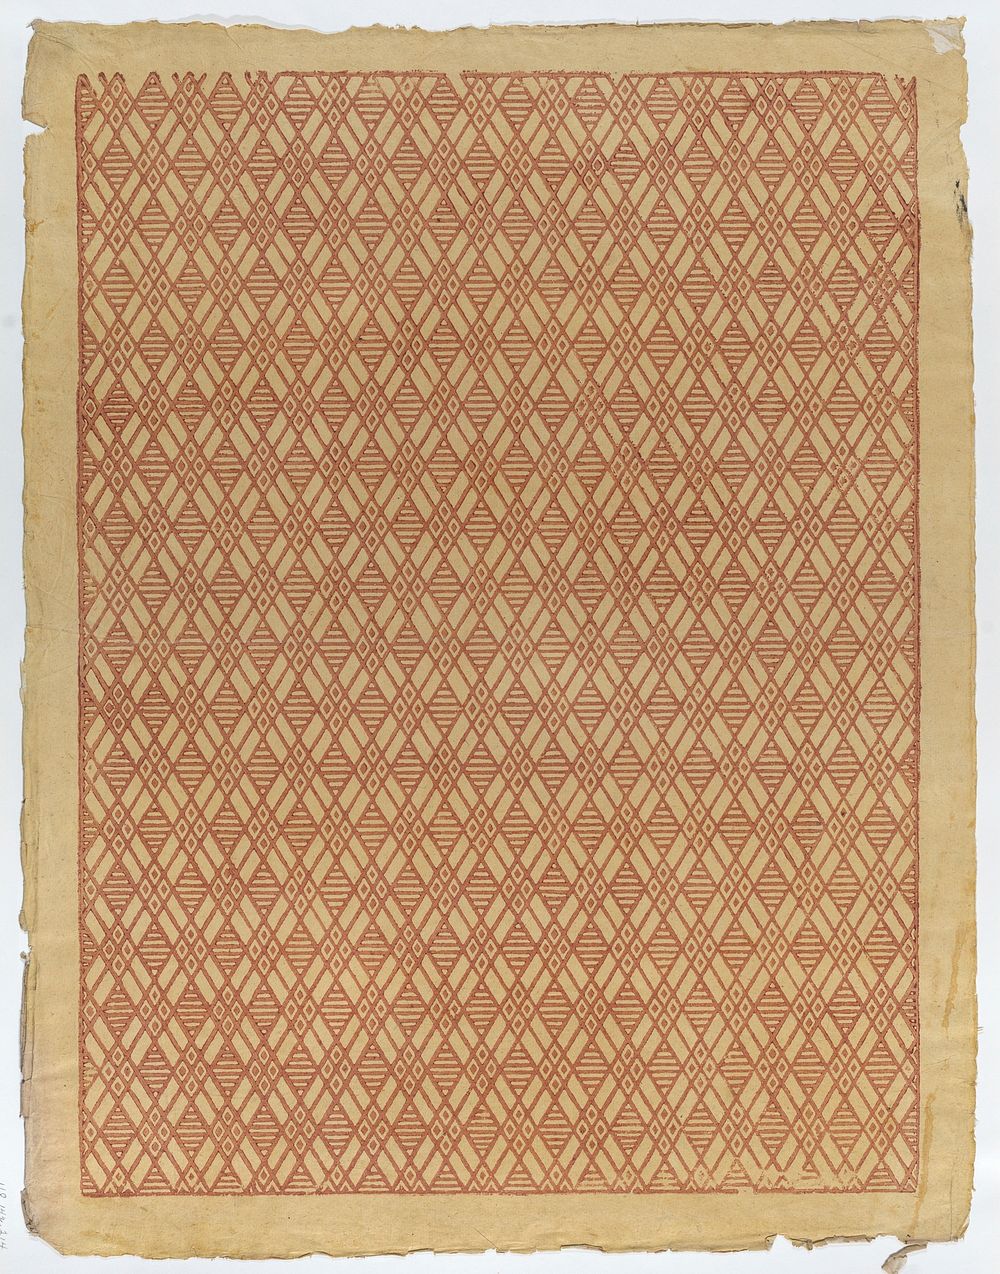 Sheet with overall red geometric pattern